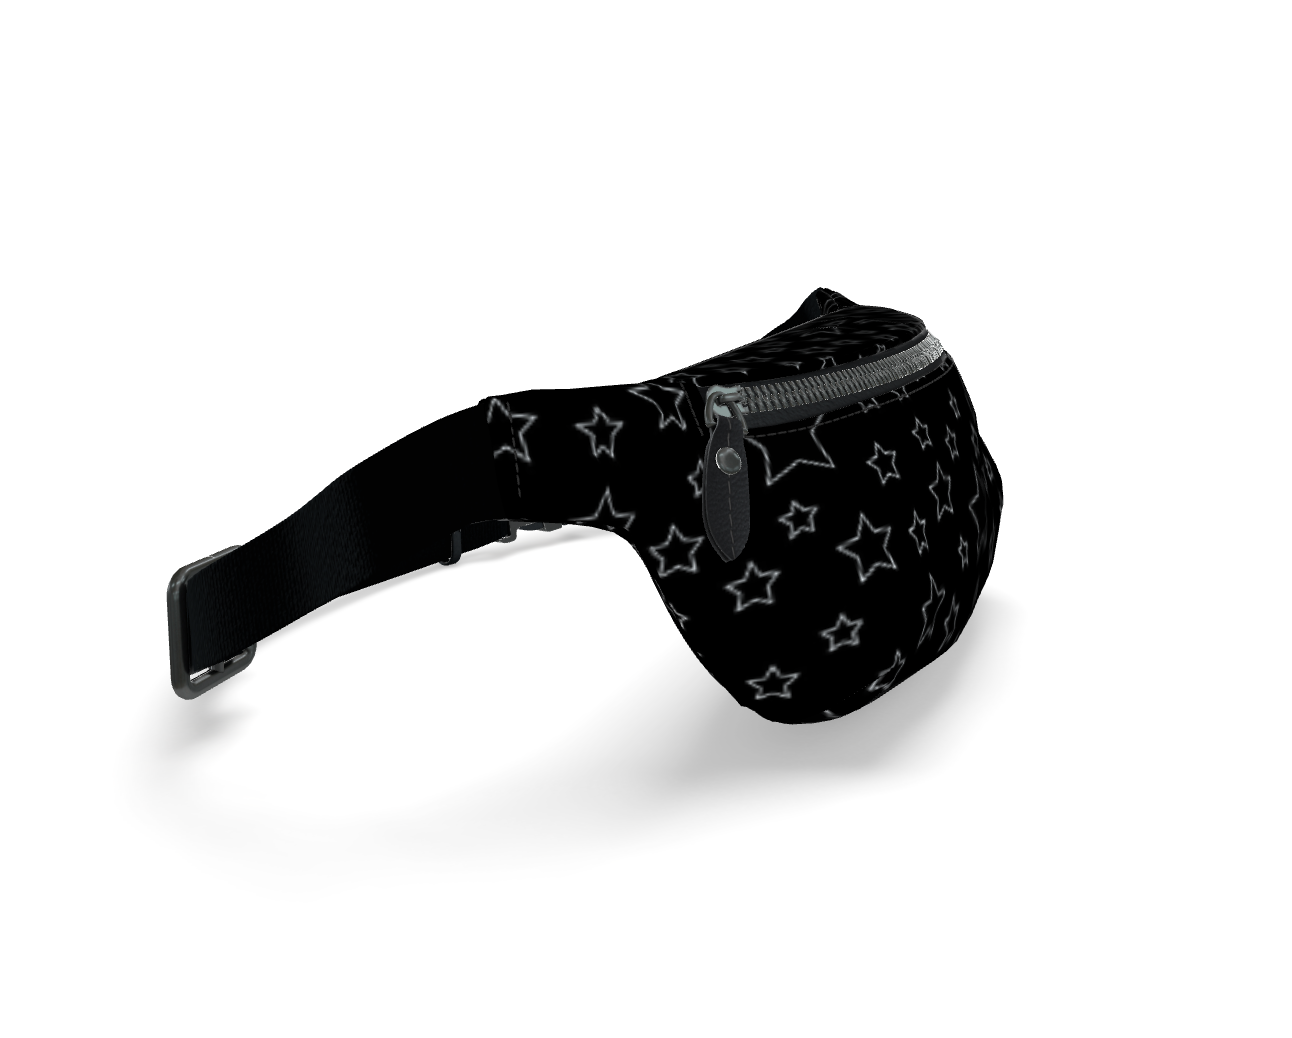 UNTITLED BOUTIQUE Black Nappa Leather Star Fanny Pack - Limited Edition